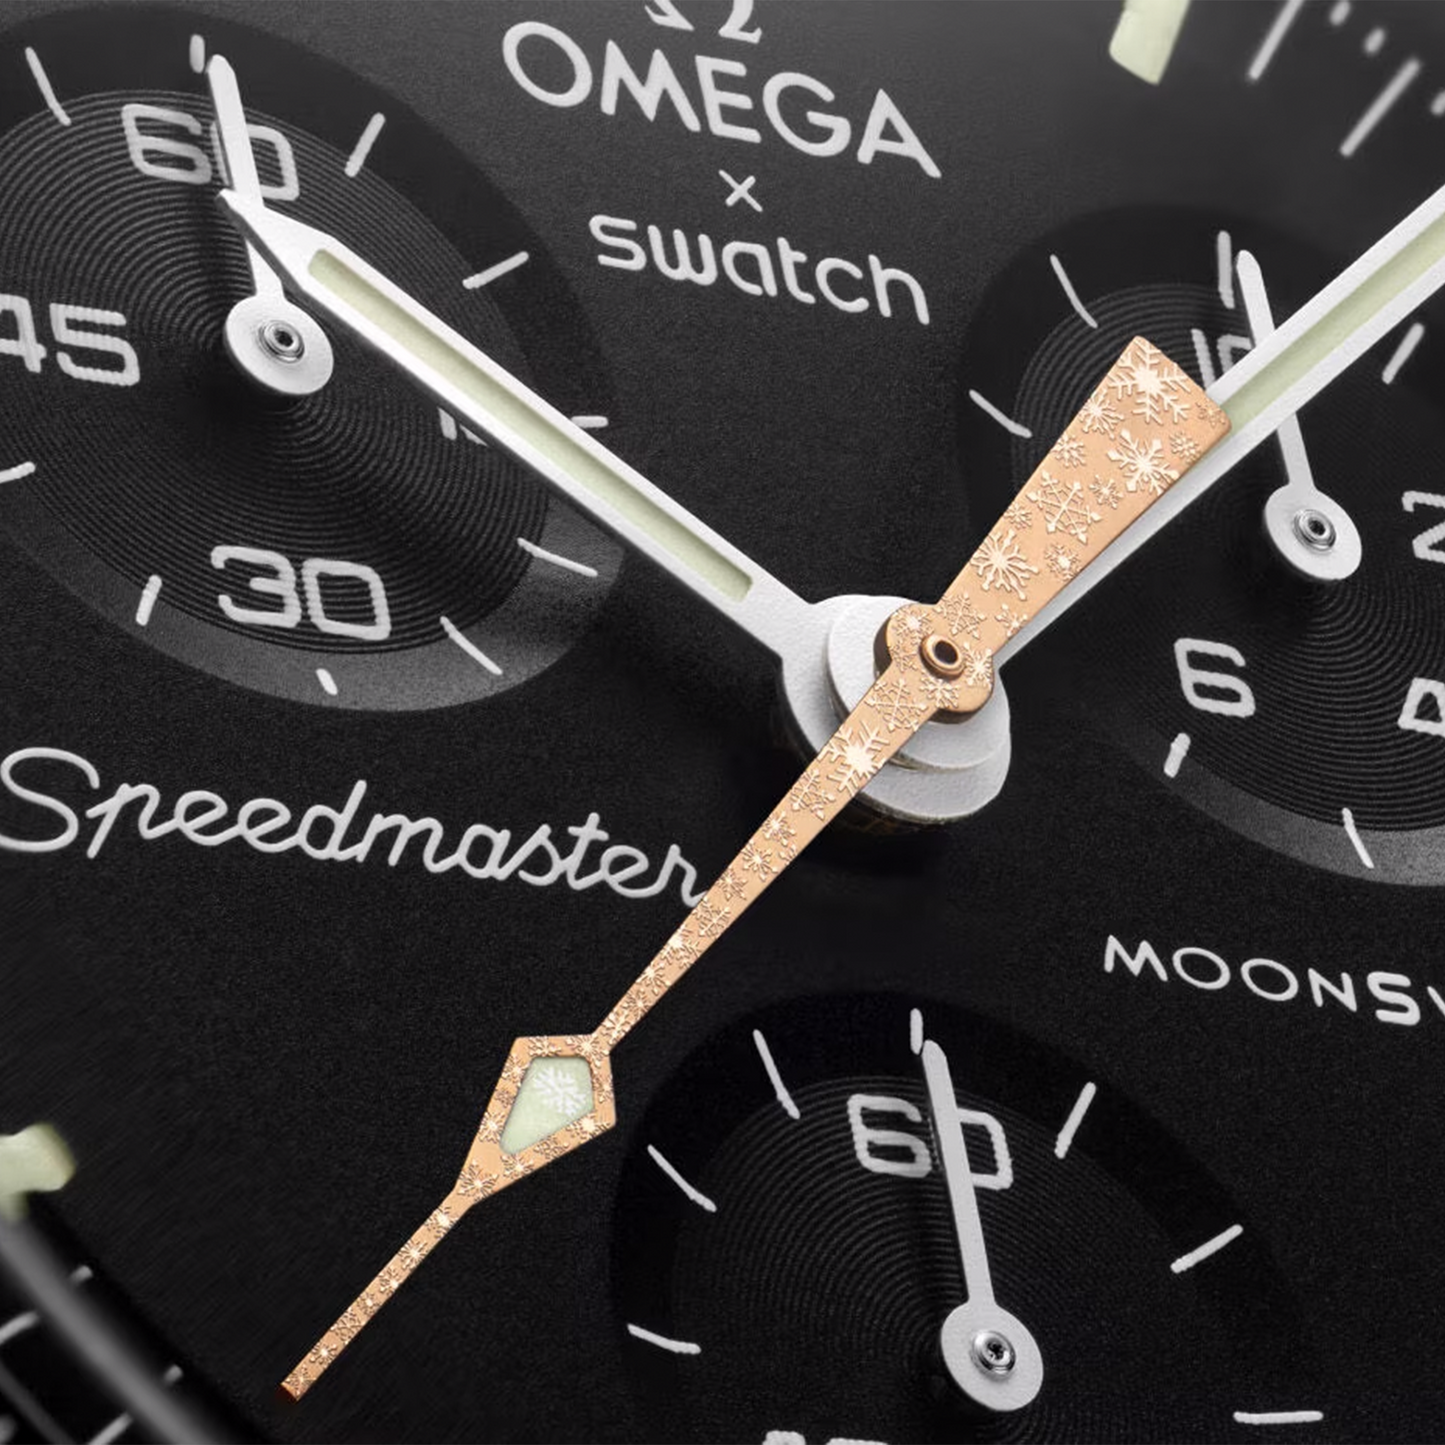 Swatch x Omega Bioceramic Moonswatch Mission to the Moon 18K Gold [Snowflake Moonshine]